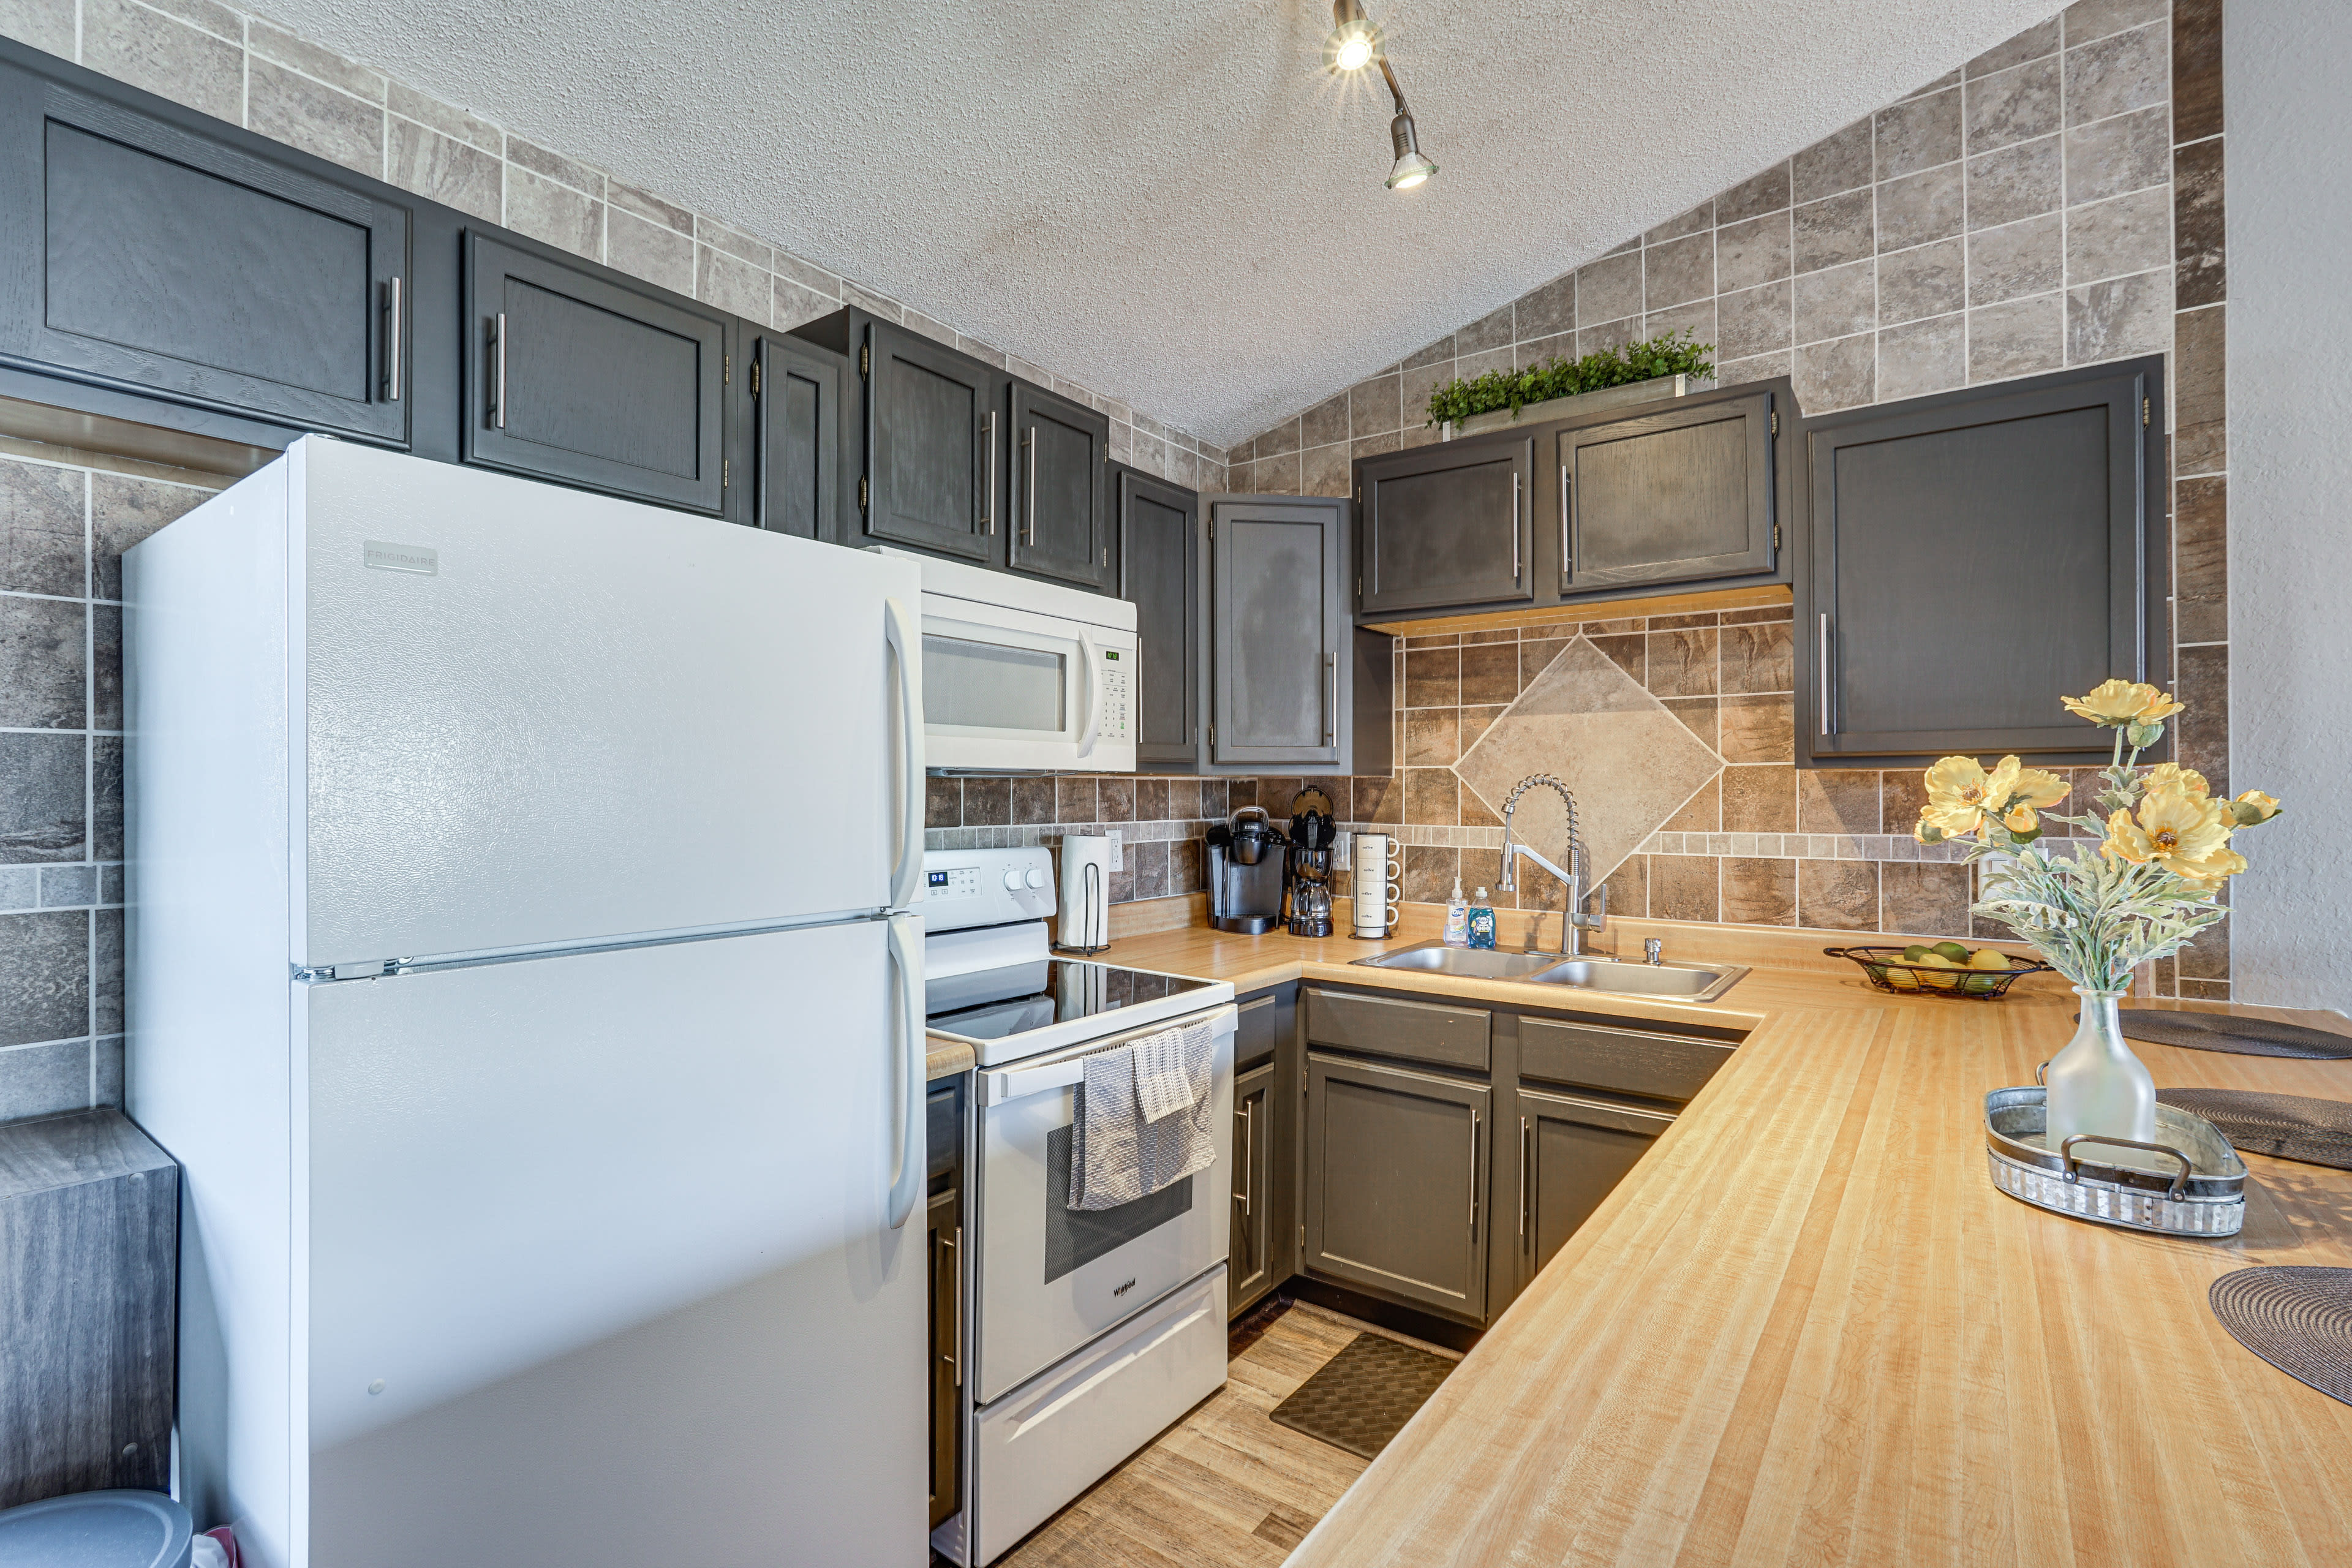 Kitchen | 840 Sq Ft | Single-Story Unit | 2nd-Floor Condo